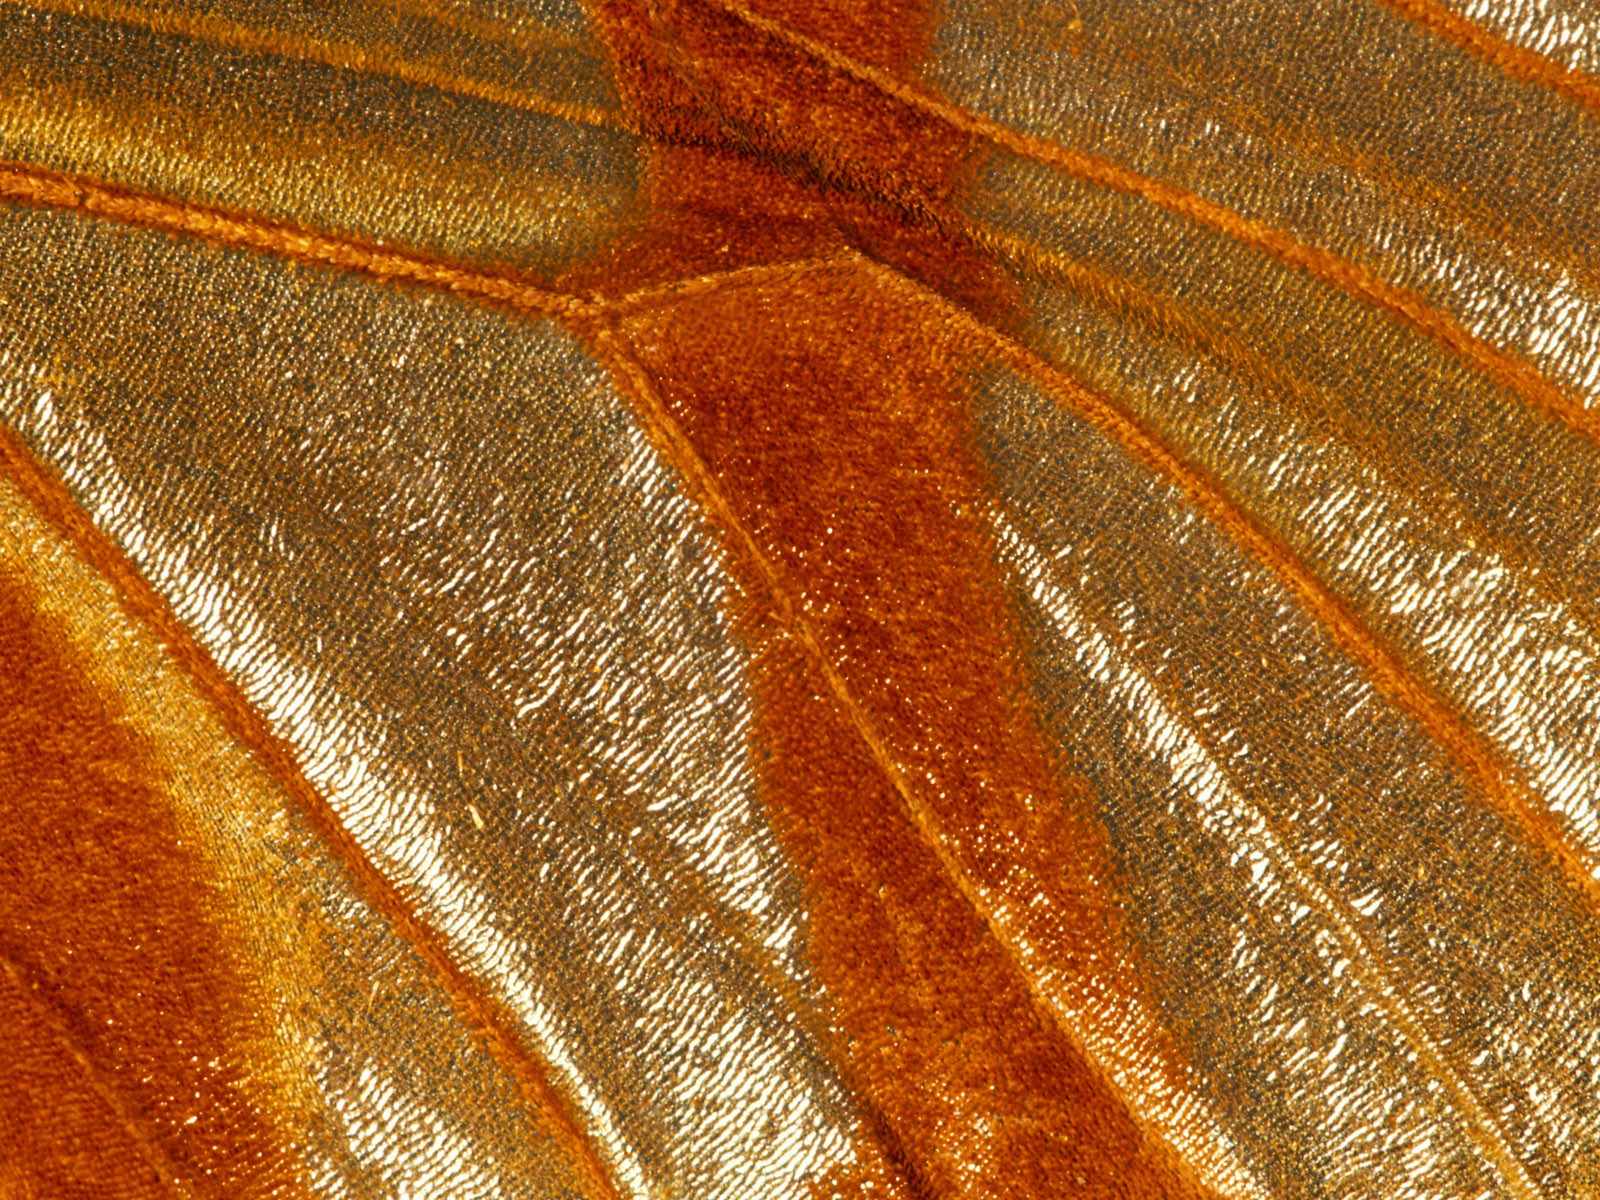 Colorful feather wings close-up wallpaper (2) #11 - 1600x1200